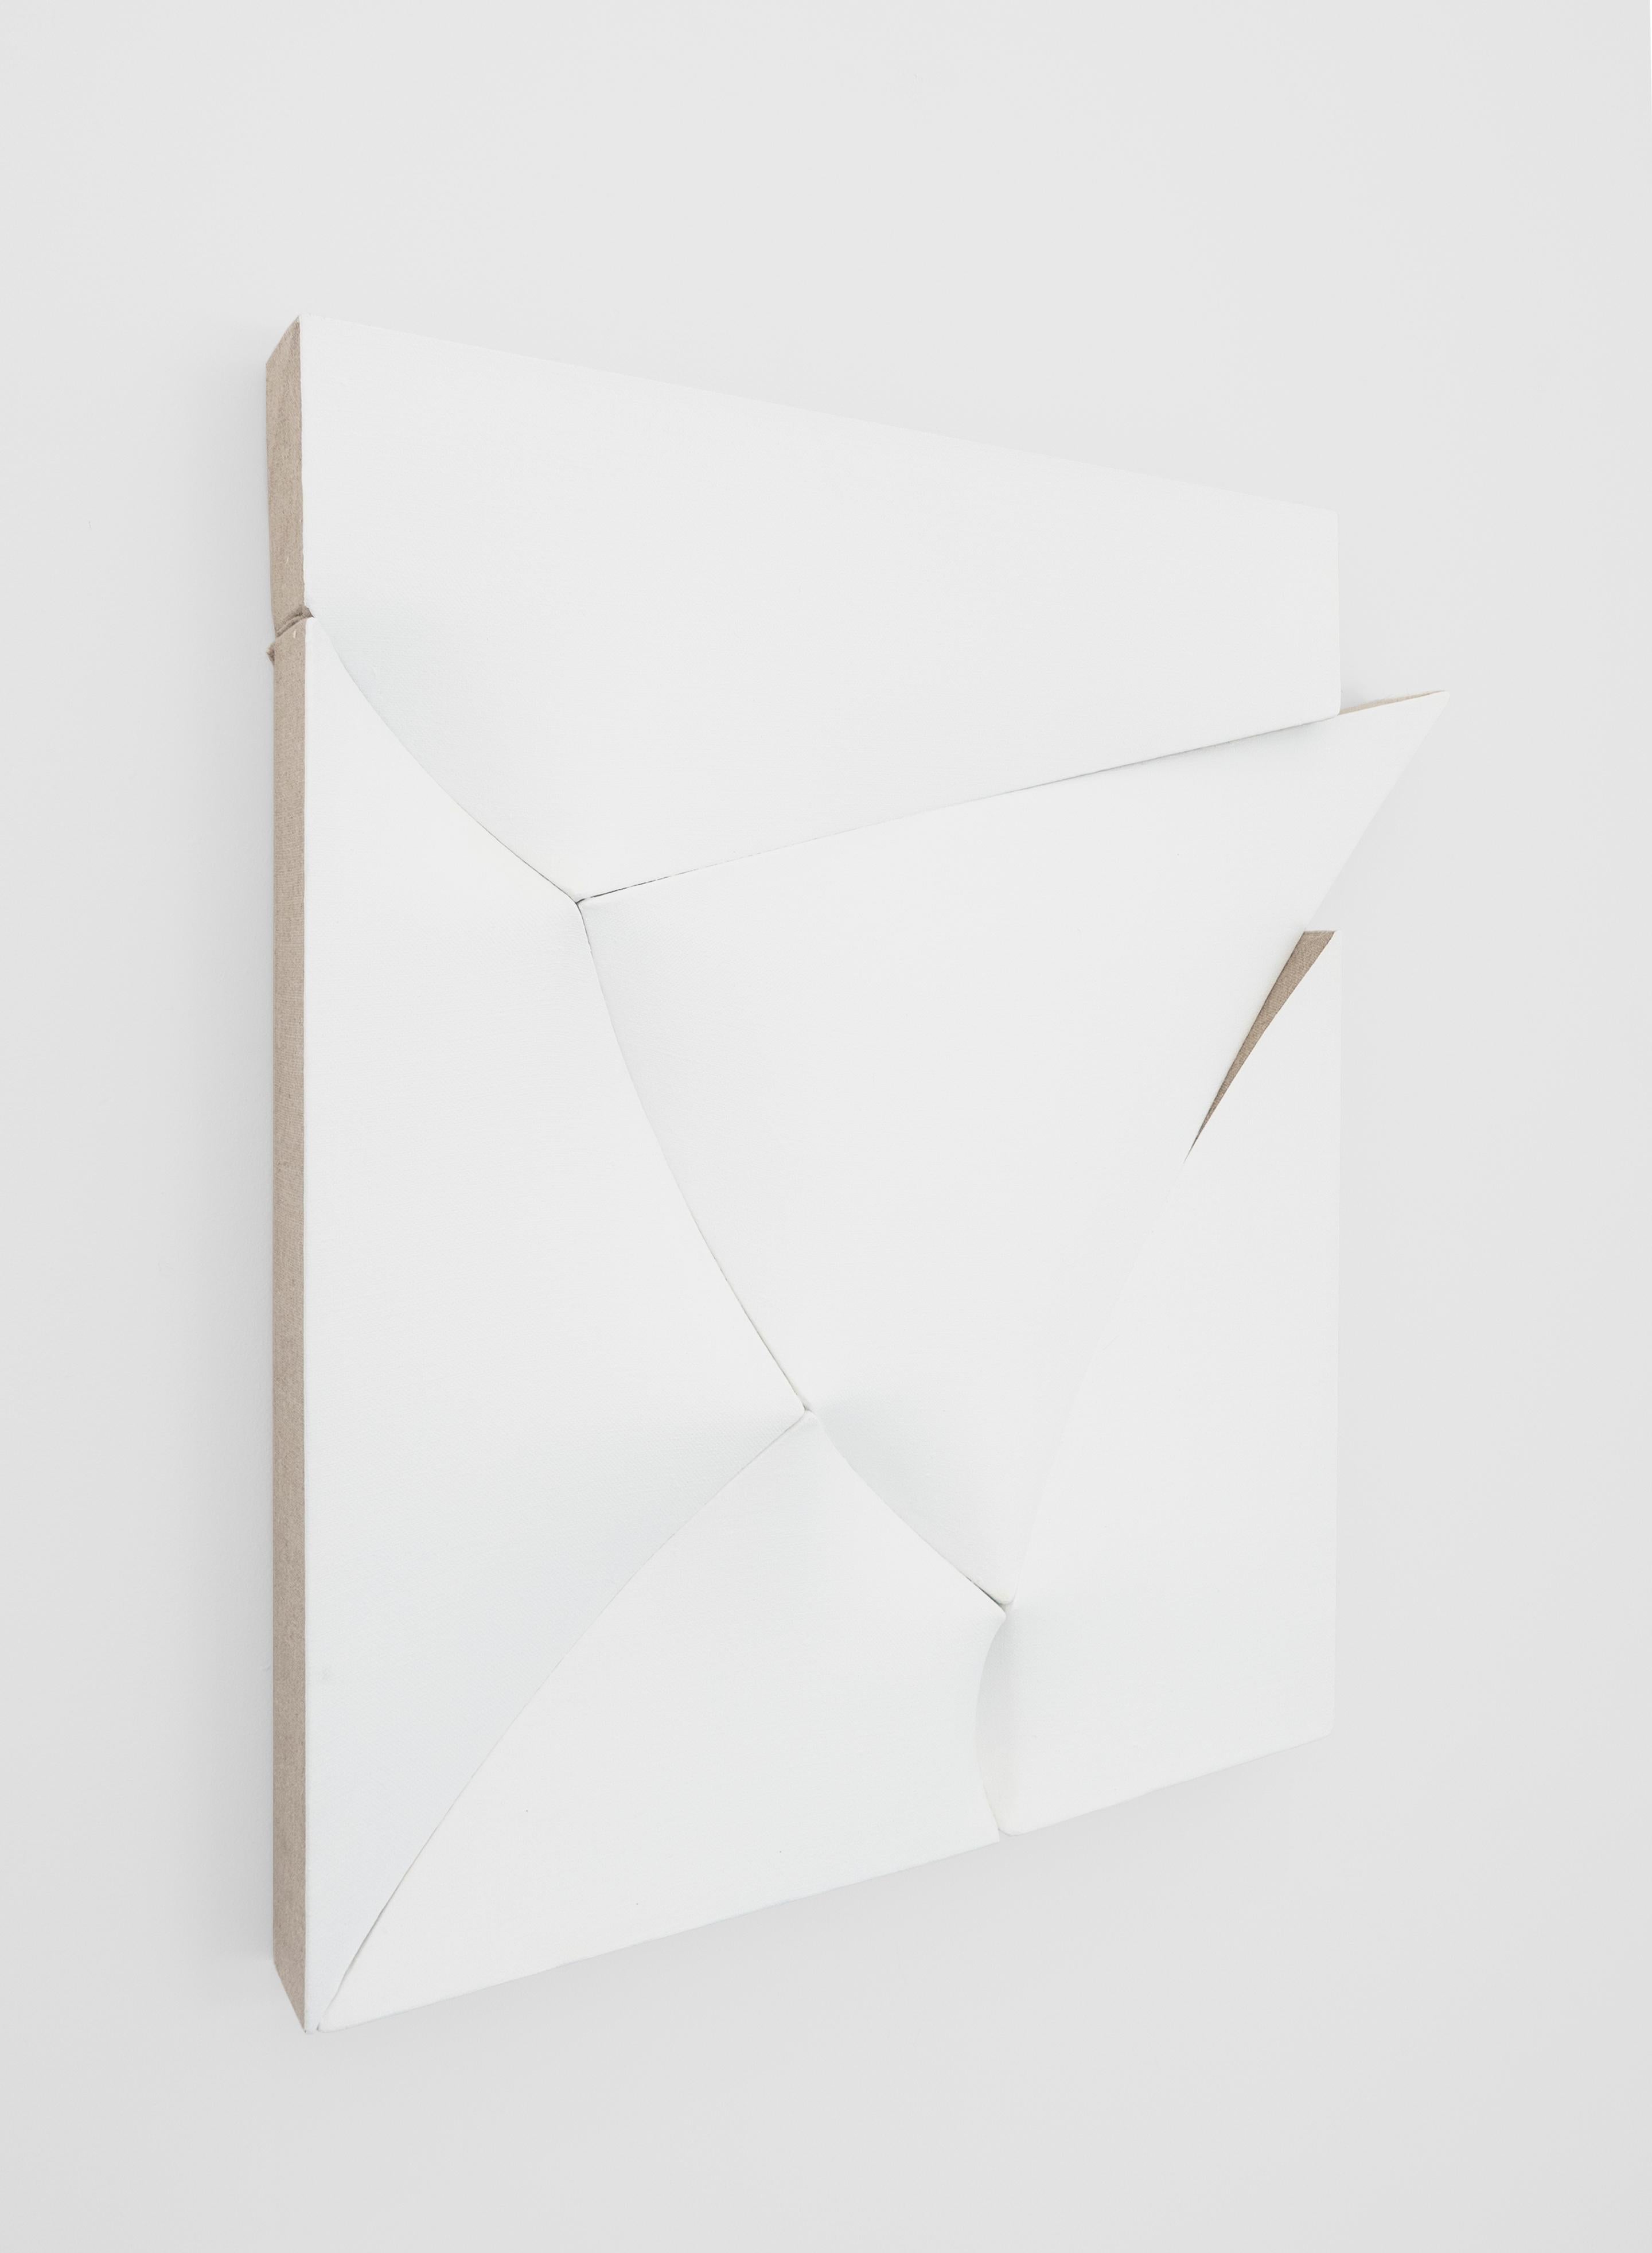 Jan Maarten Voskuil Abstract Painting - Similar Painting Different Object (White Unlimitation #2)